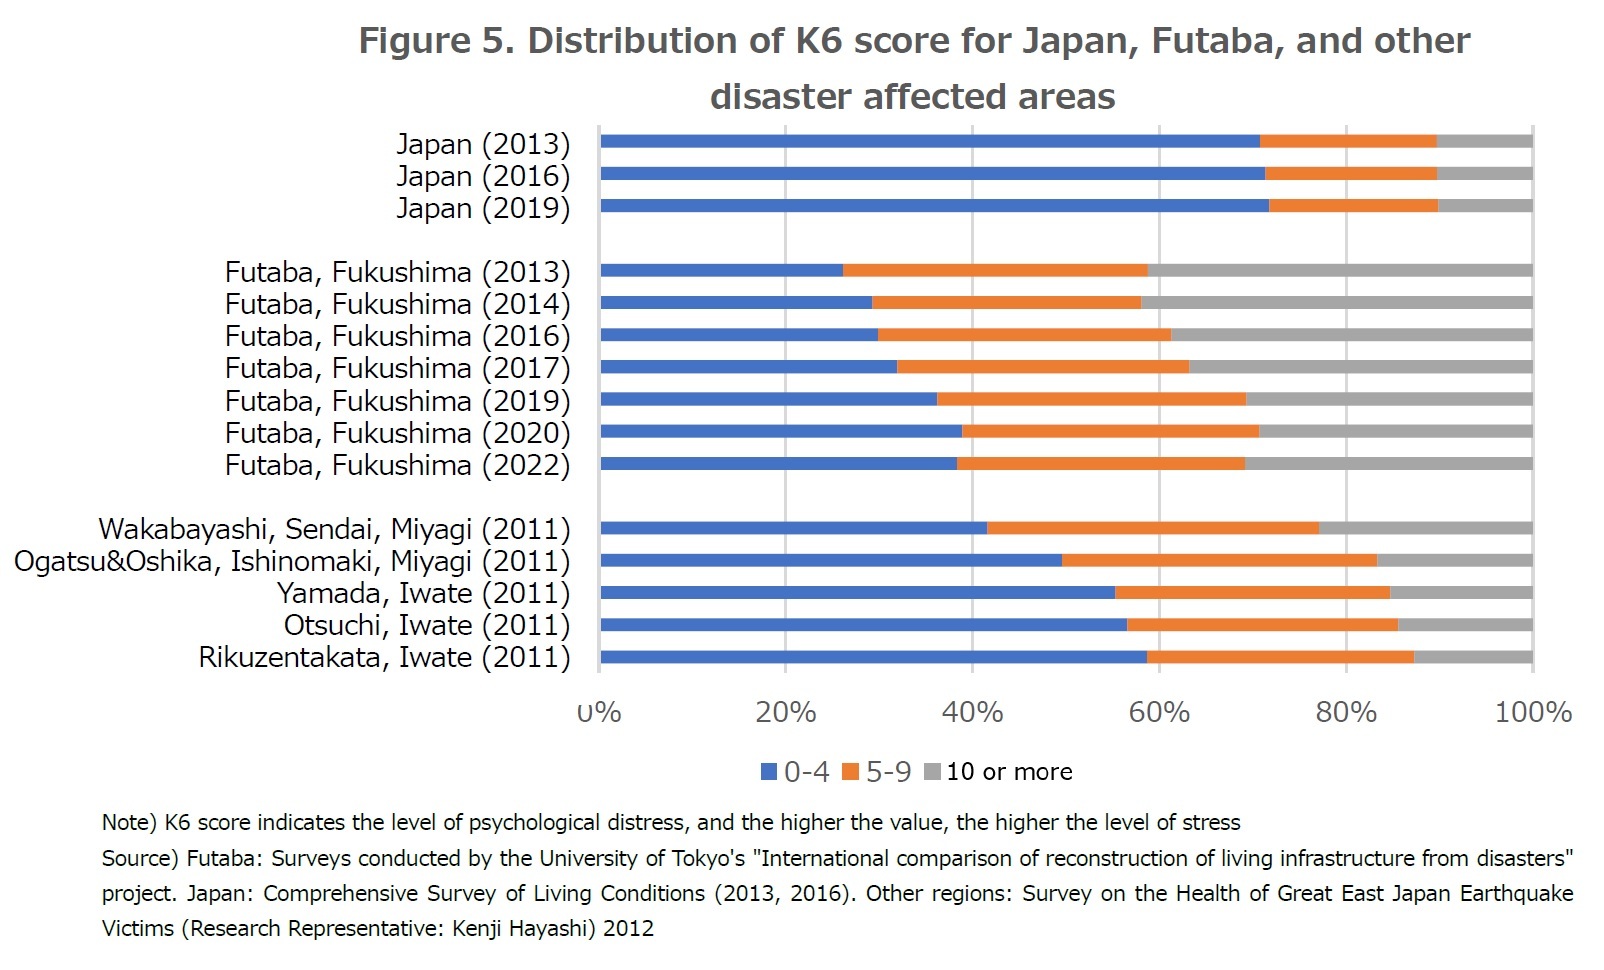 Figure 5. Distribution of K6 score for Japan, Futaba, and other disaster affected areas